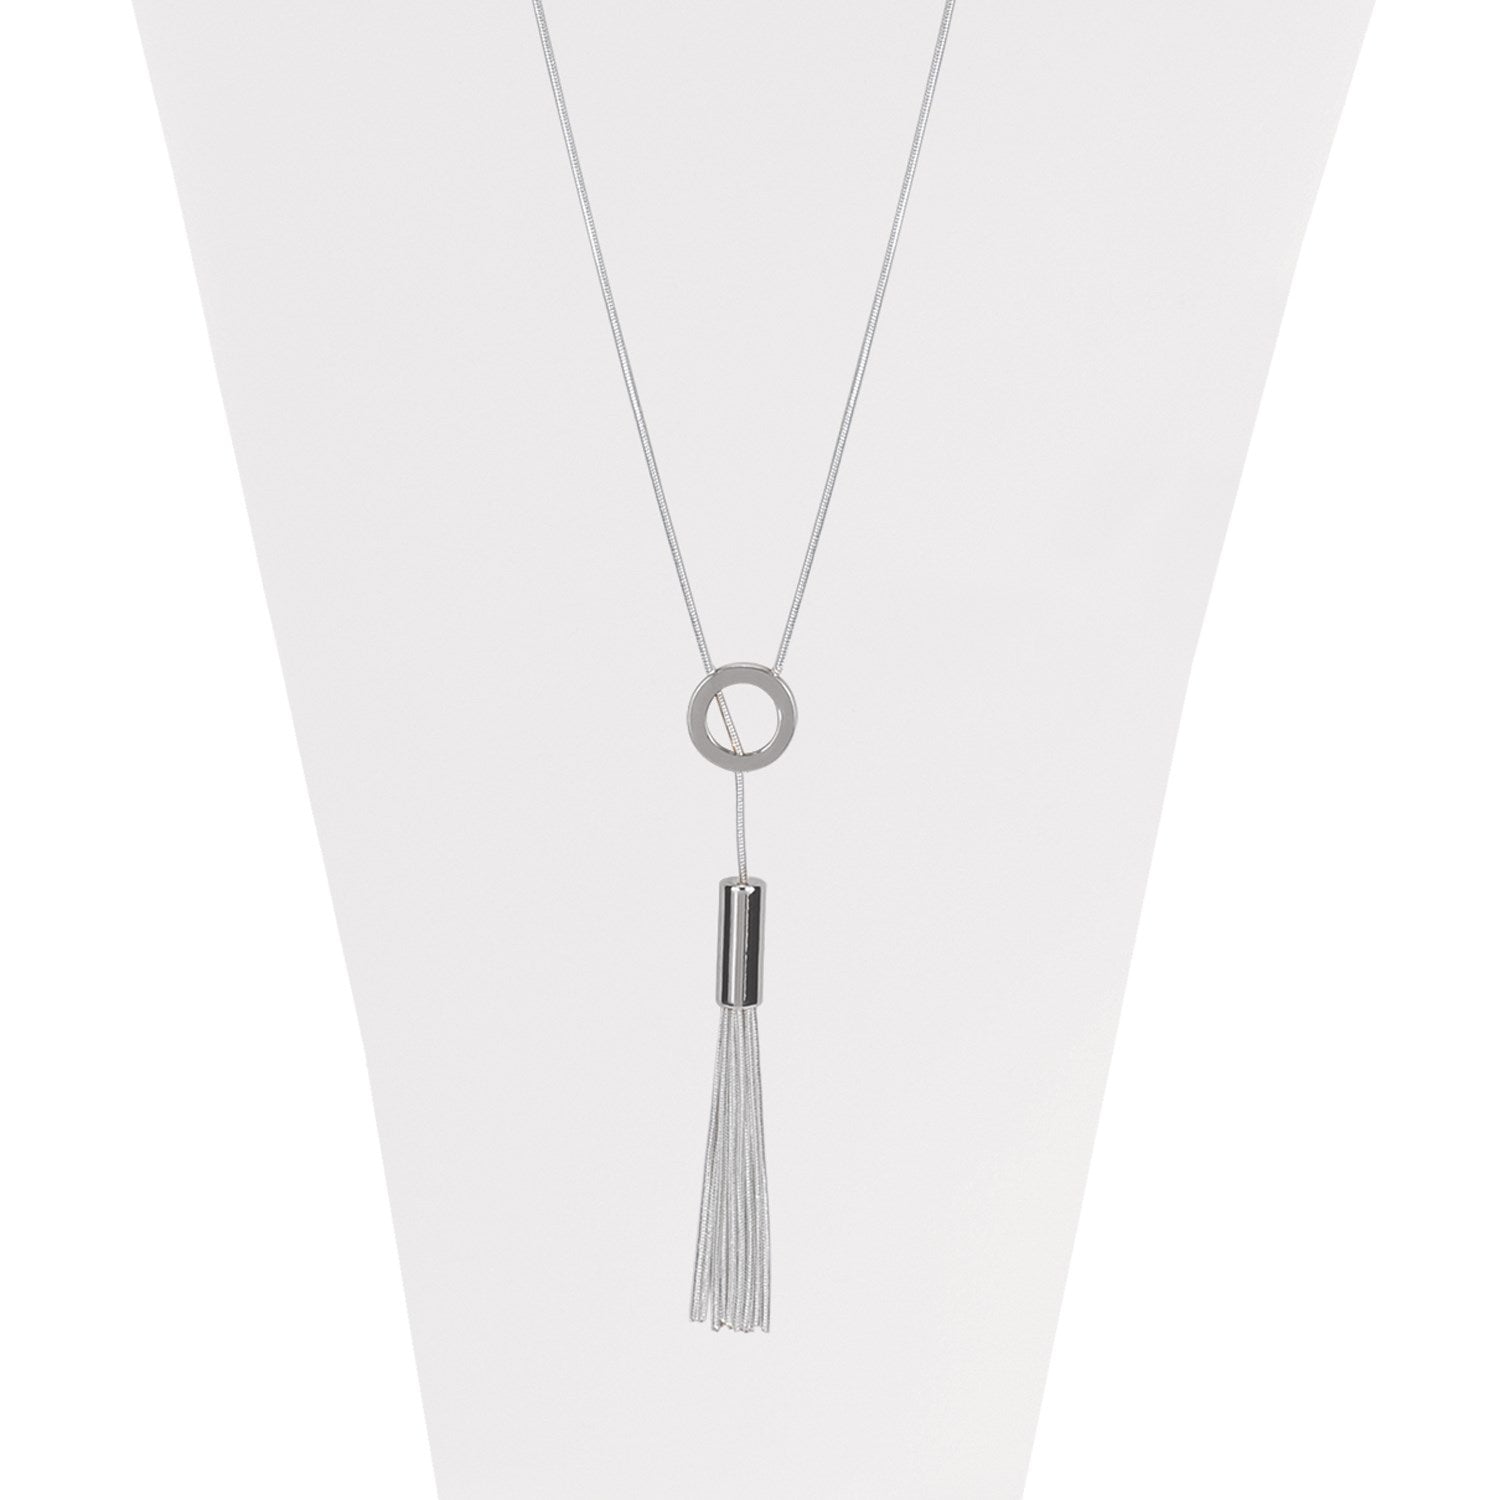 Silver long adjustable necklace with metallic ring and multi chain tassels